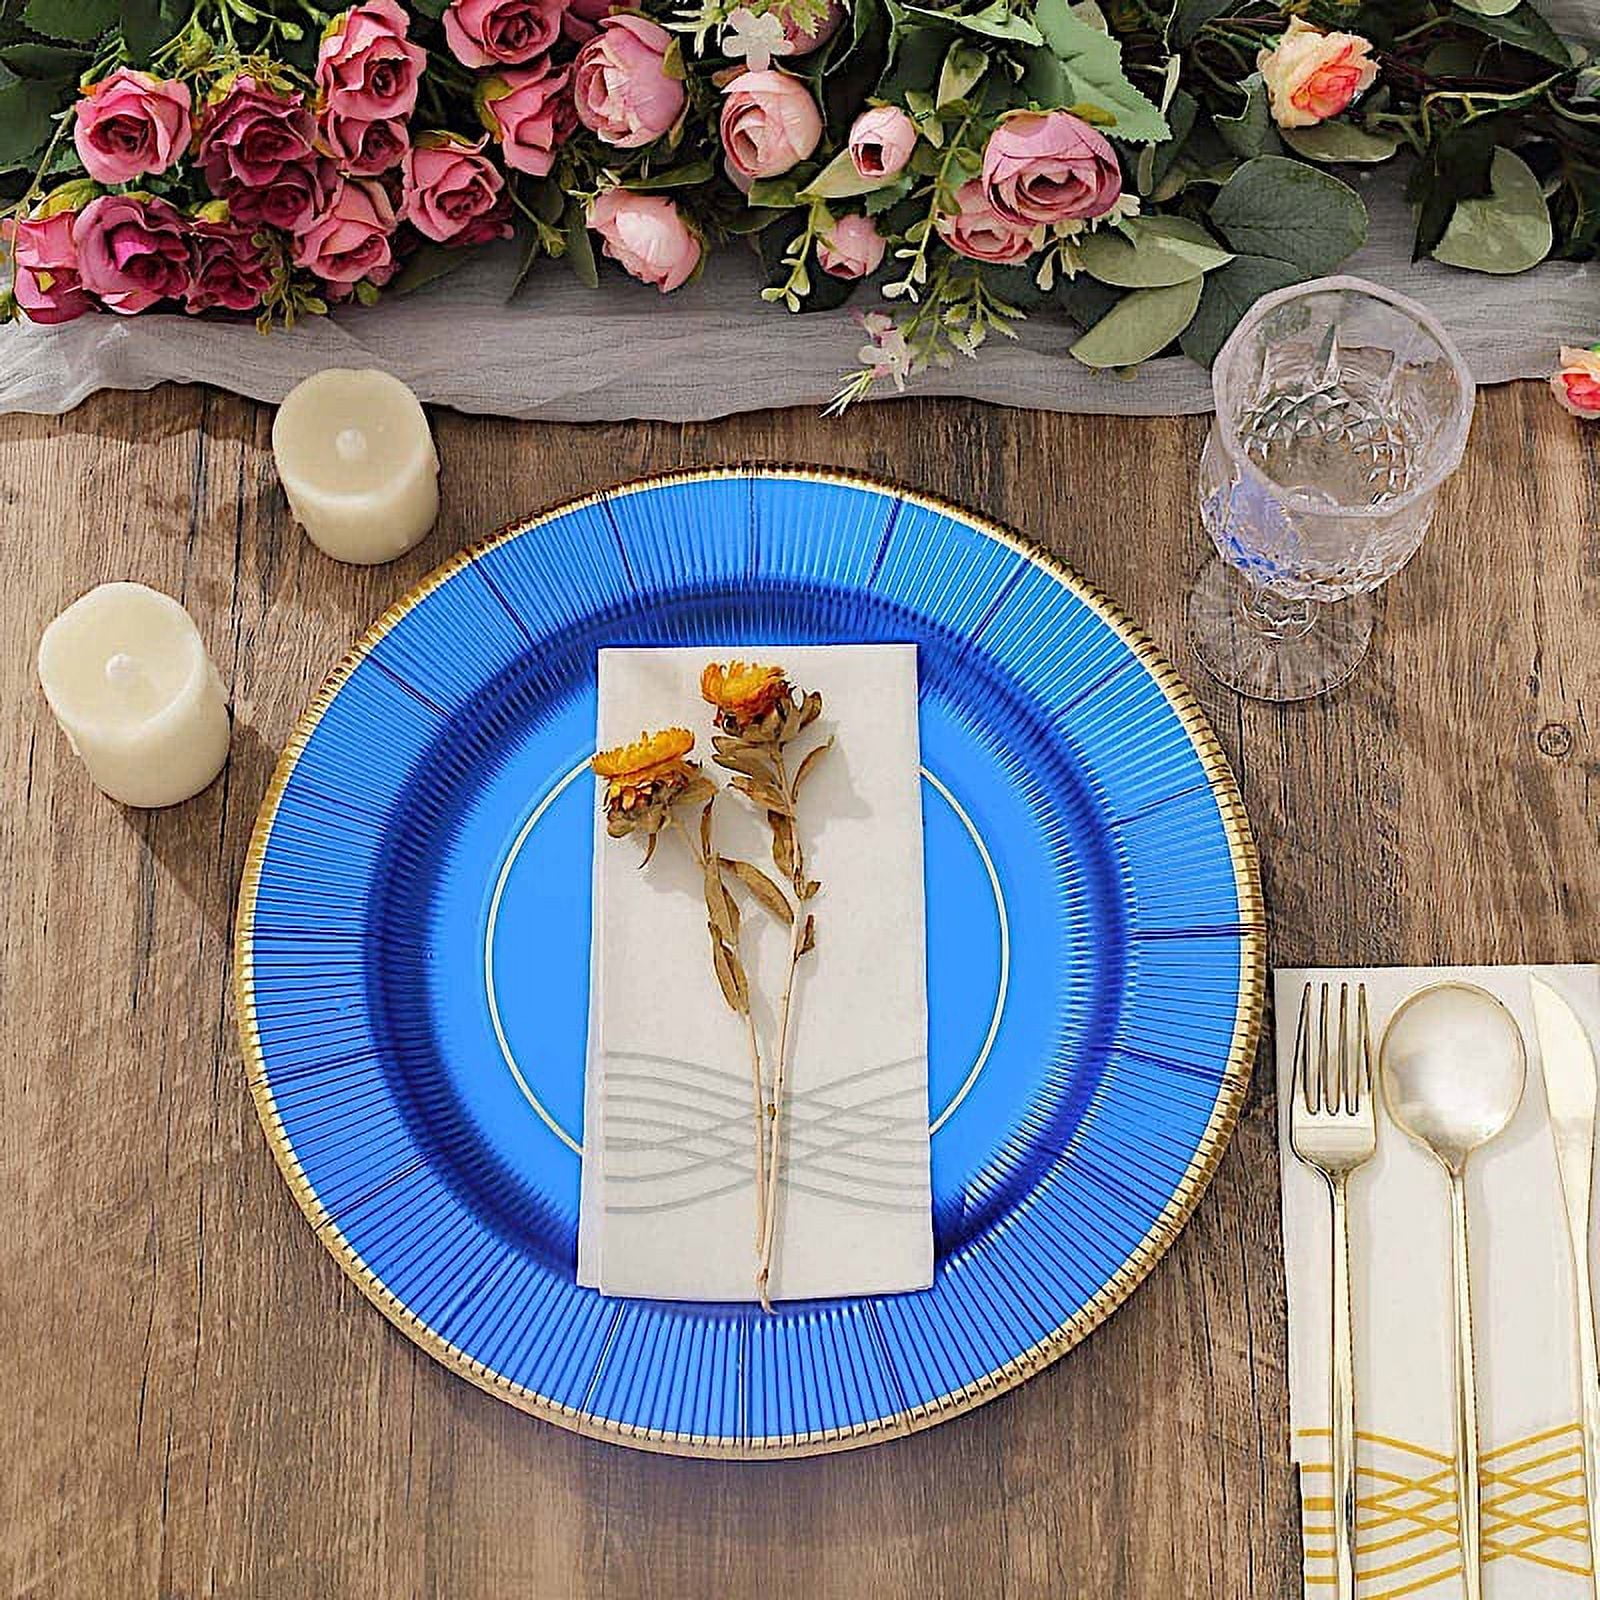 BalsaCircle 25 Royal Blue 13 Round Disposable Paper Charger Plates  Metallic Trim Party Tableware 